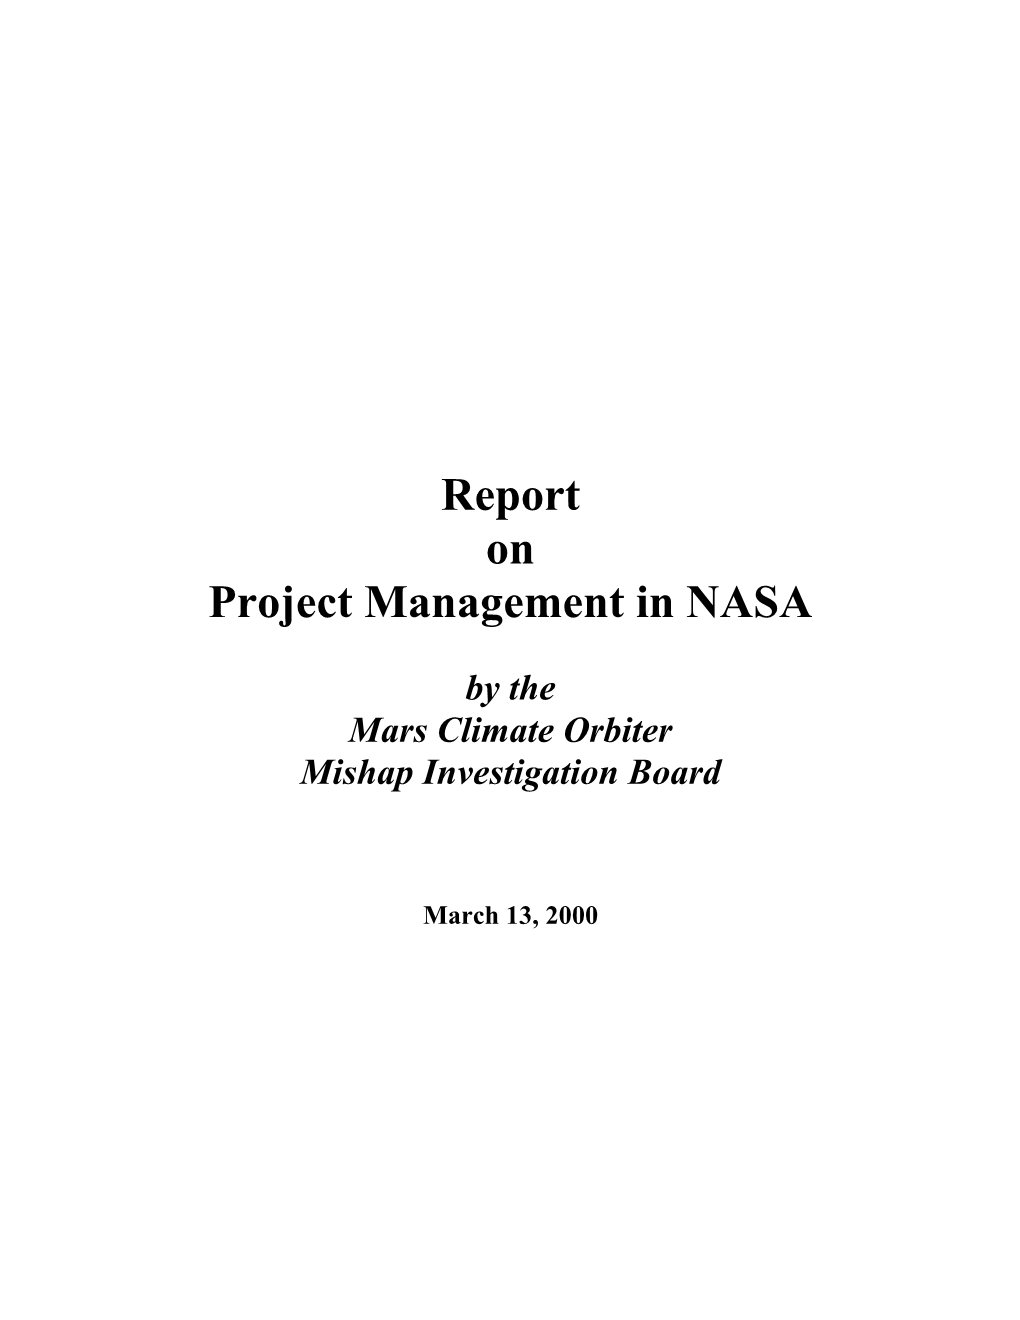 Report on Project Management in NASA by the Mars Climate Orbiter Mishap Investigation Board